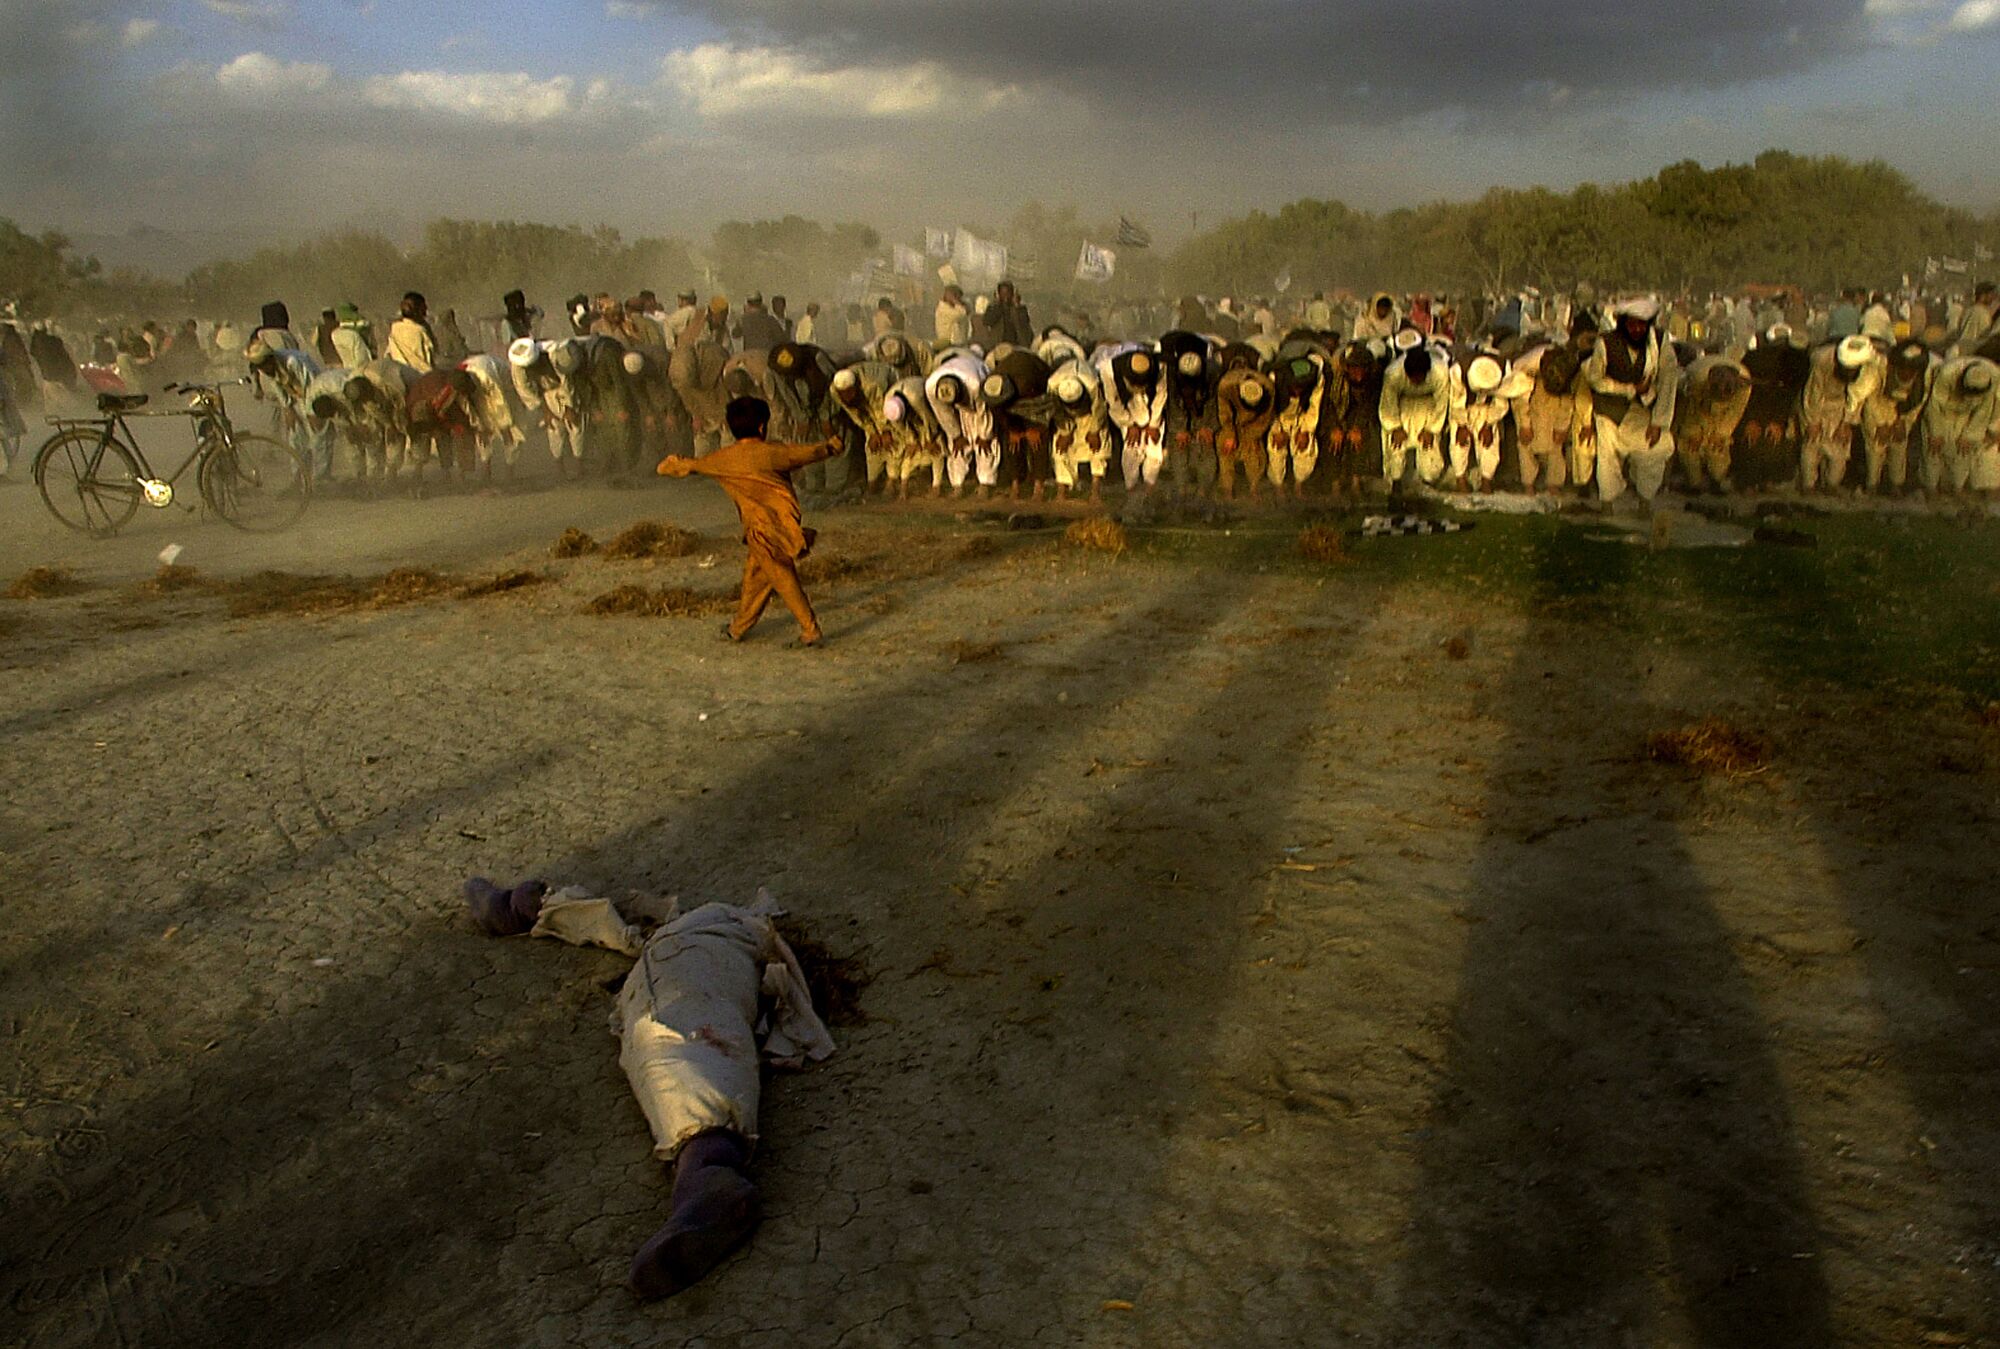 A boy pirouettes in the wind between a dismembered doll and Muslim men kneeling in prayer on Nov. 2, 2001.